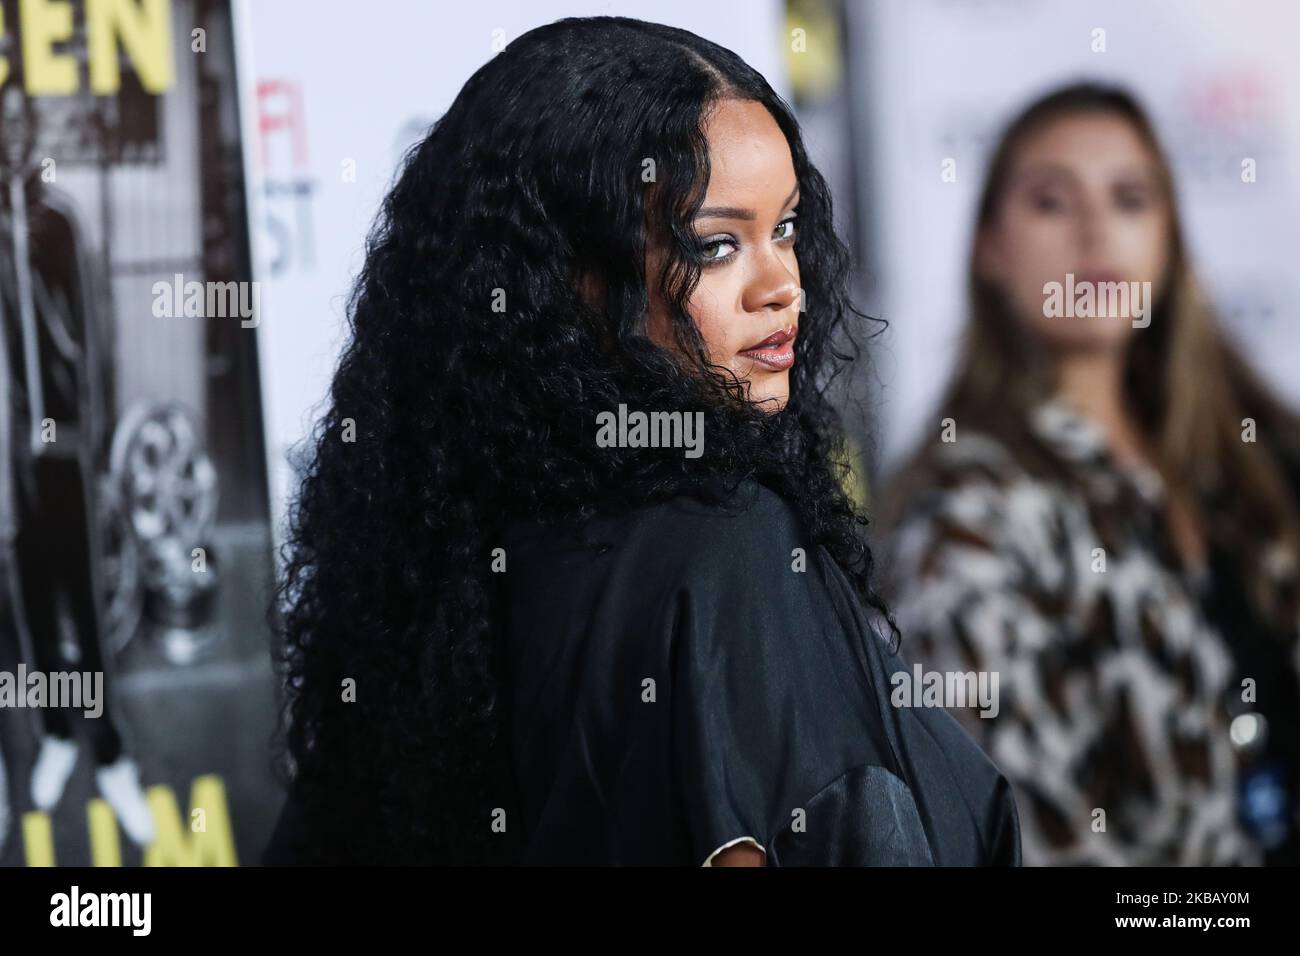 HOLLYWOOD, LOS ANGELES, CALIFORNIA, USA - NOVEMBER 14: Singer Rihanna arrives at the AFI FEST 2019 - Opening Night Gala - Premiere Of Universal Pictures' 'Queen And Slim' held at the TCL Chinese Theatre IMAX on November 14, 2019 in Hollywood, Los Angeles, California, United States. (Photo by Xavier Collin/Image Press Agency/NurPhoto) Stock Photo